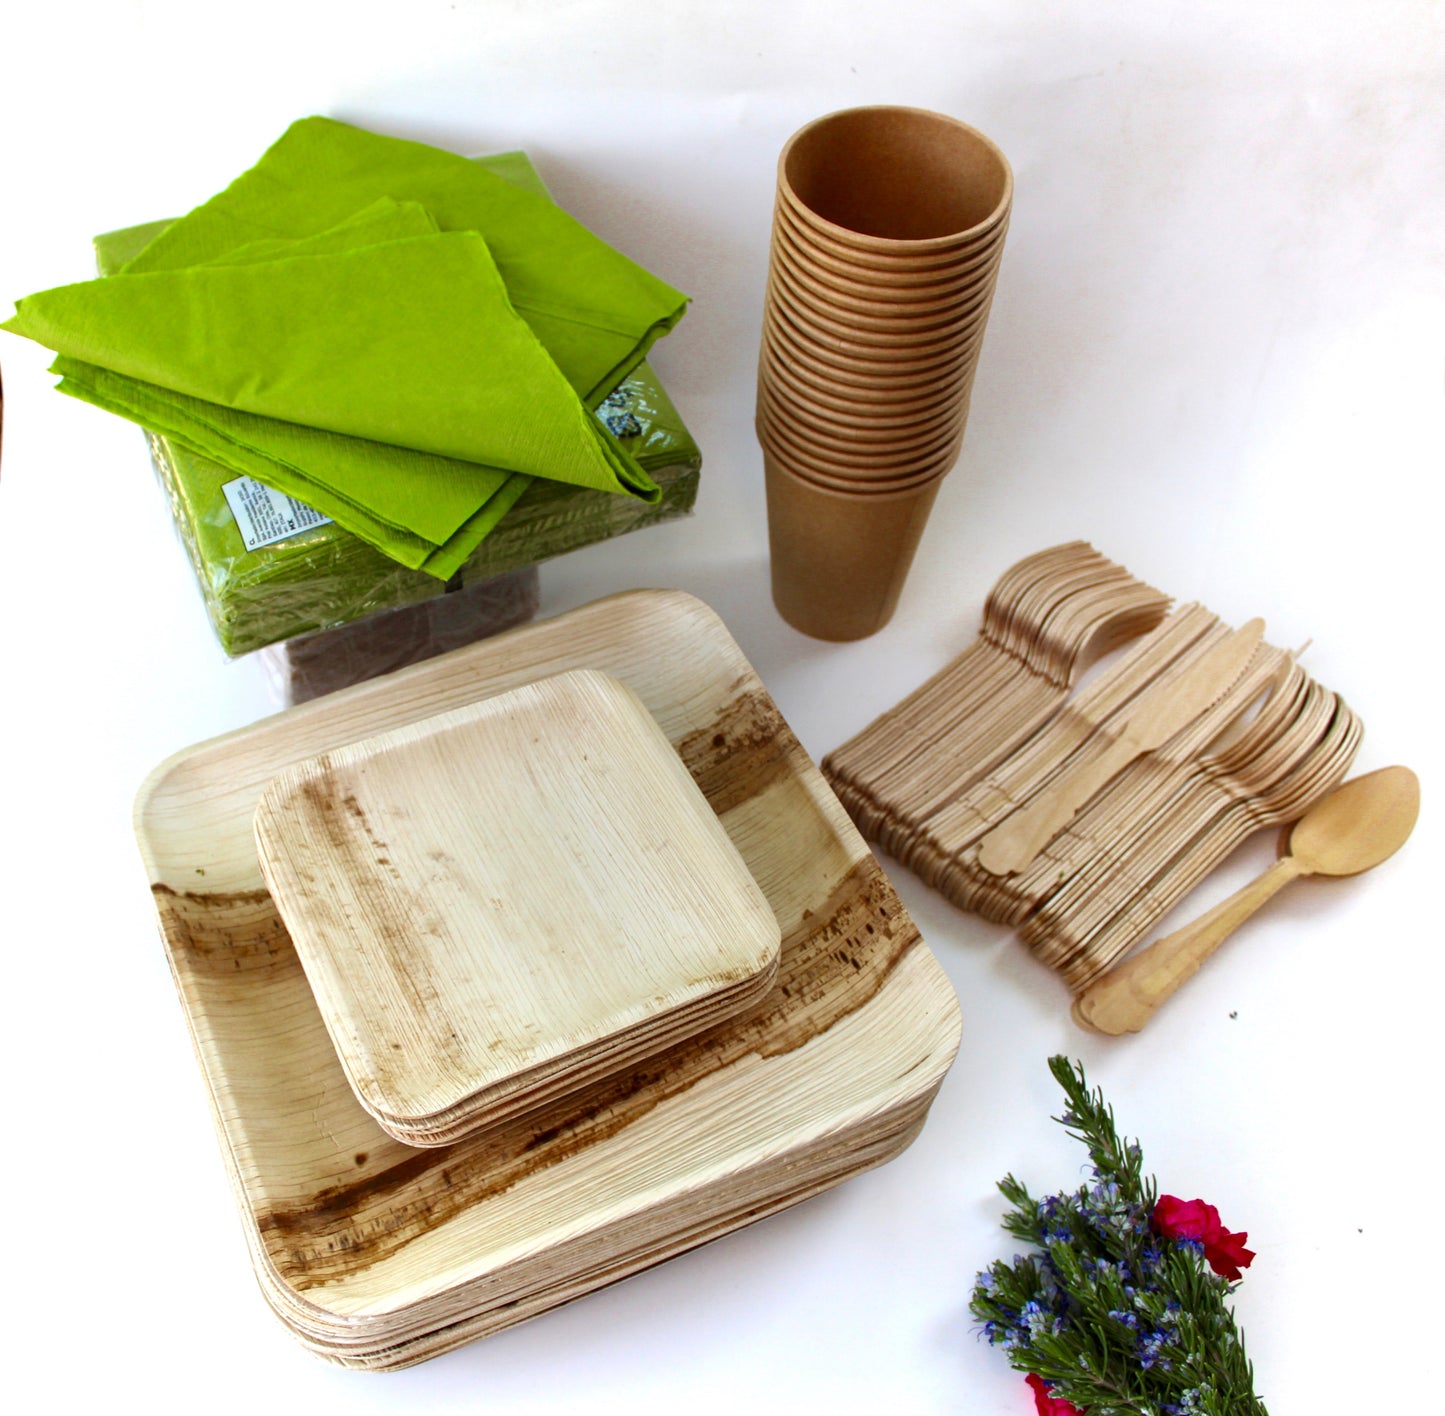 Bamboo Type Palm Leaf 25 Pic 10"Square  - 25 pice  7" Square - 25 Pic 6" Square  - 25  pic  cup  - 75 pic Cutlery - 50 Pic Napkin